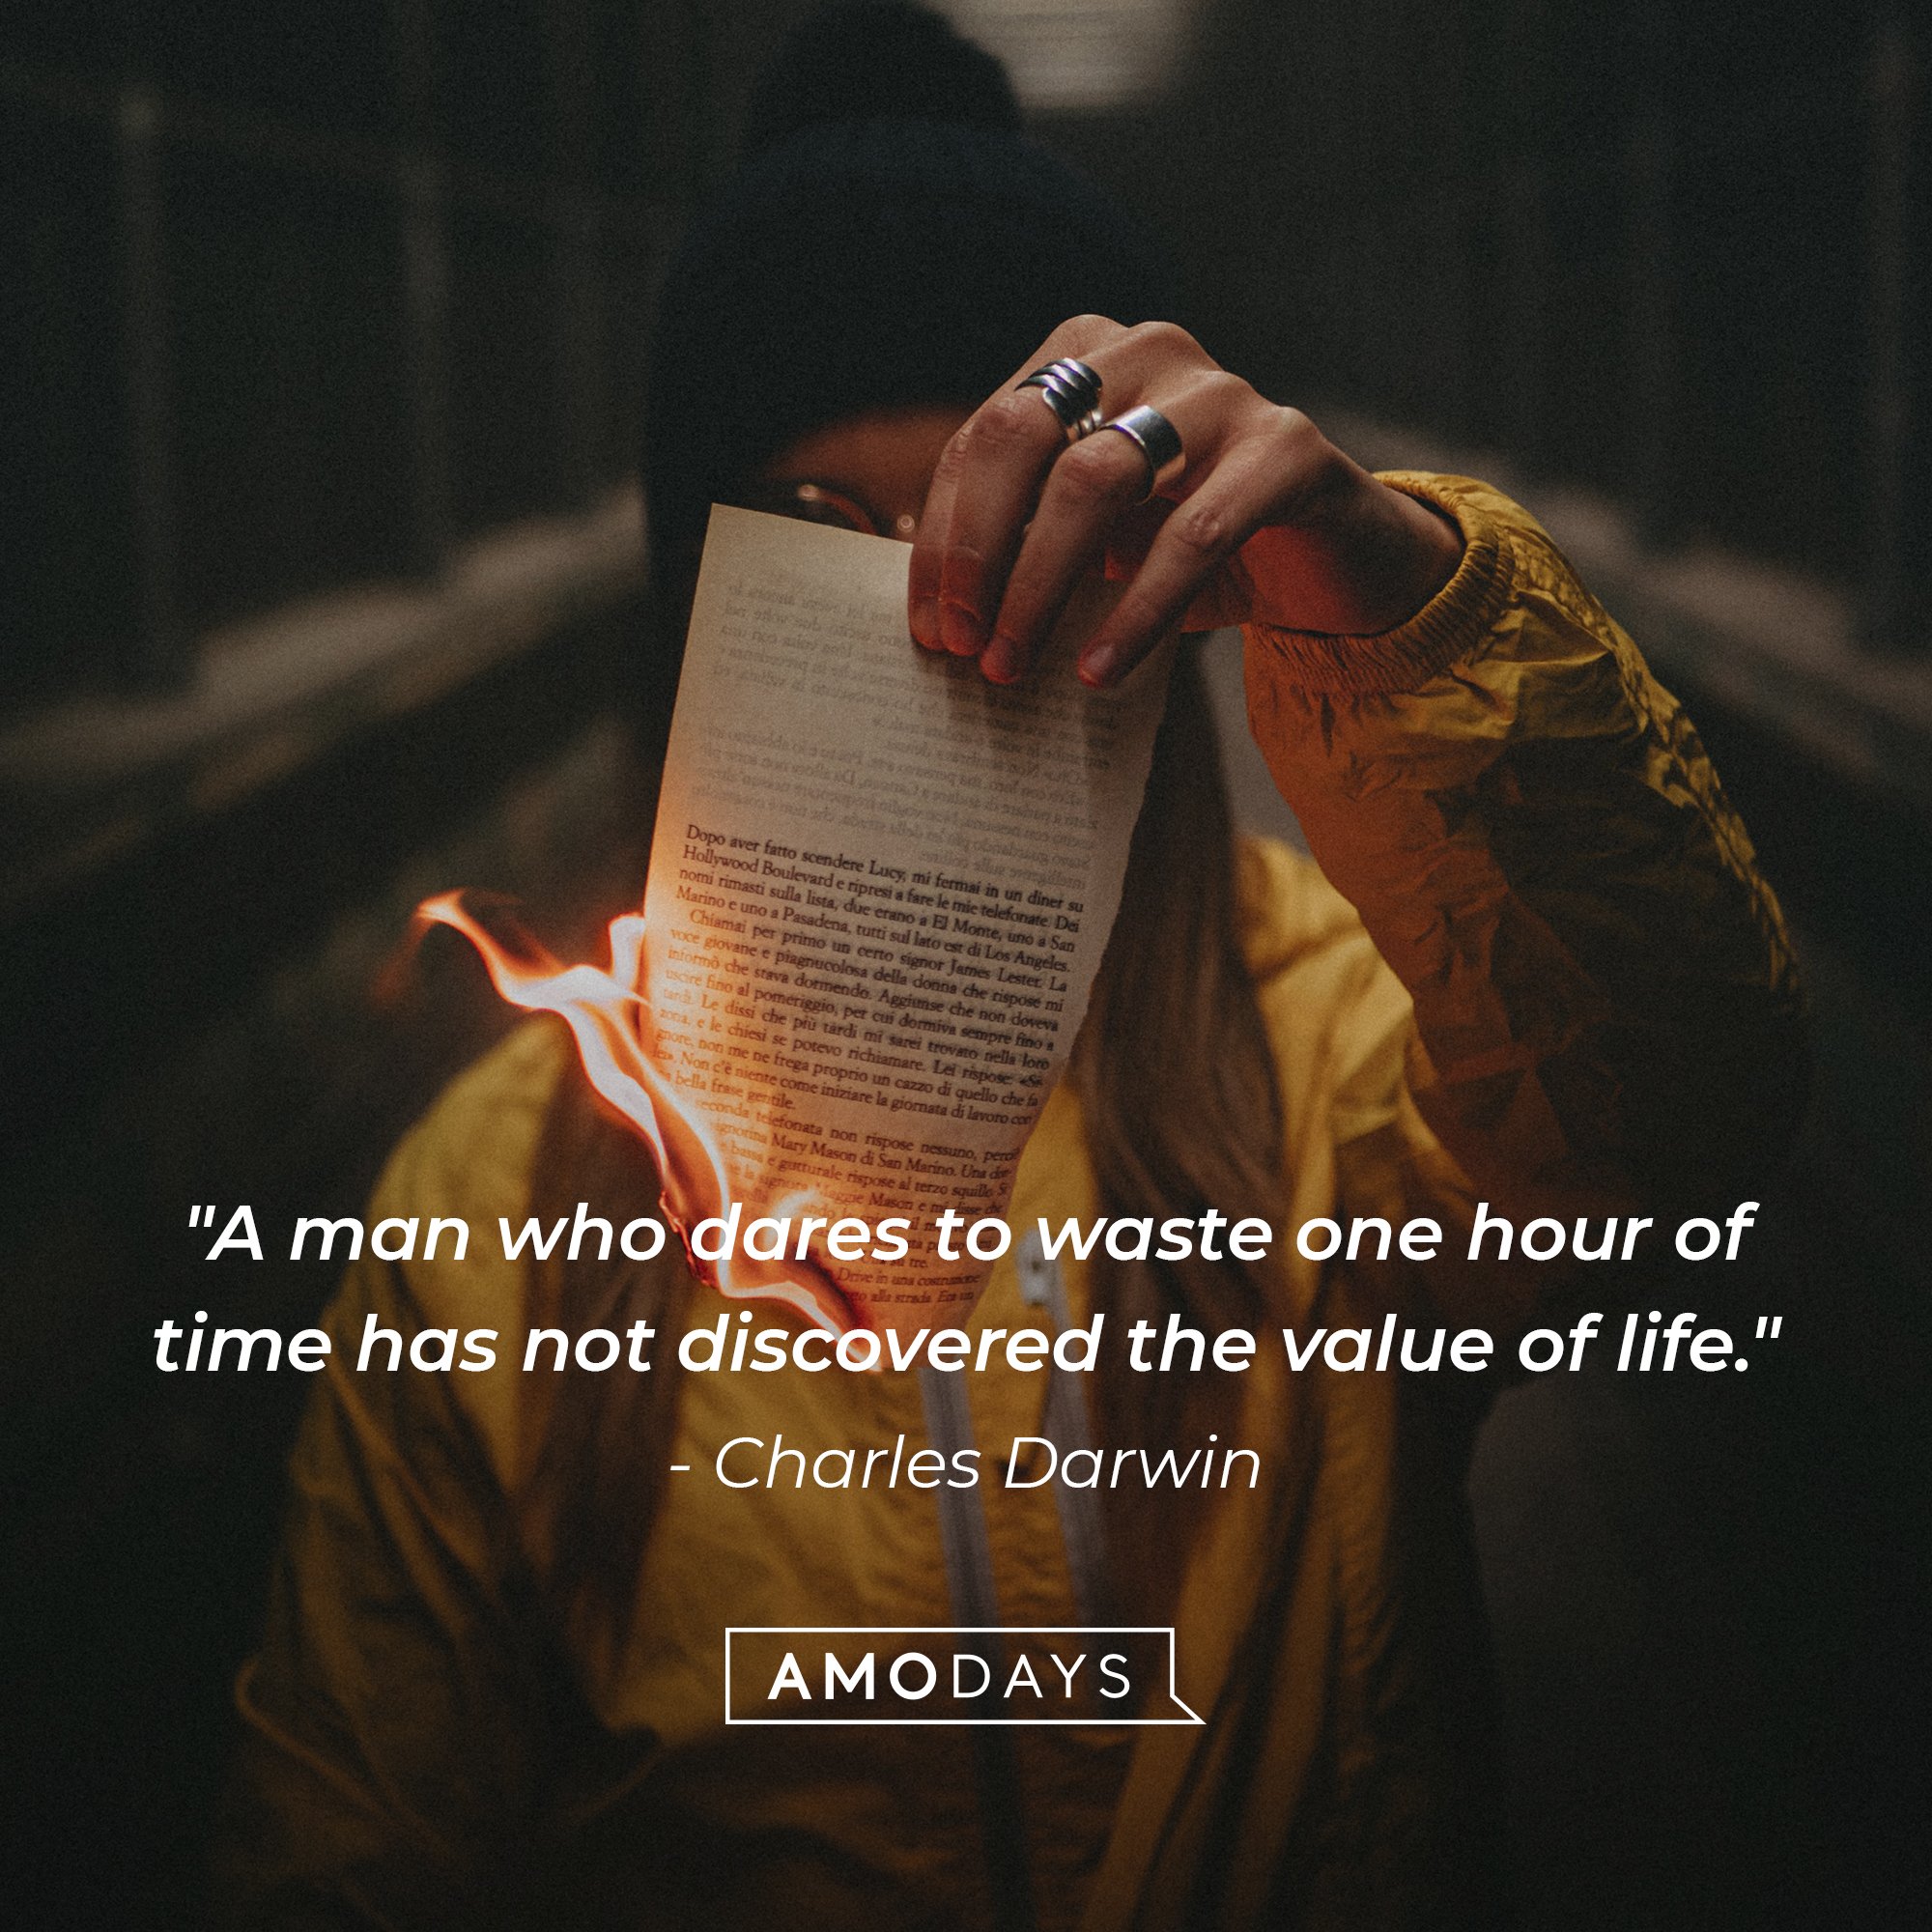 Charles Darwin's quote: "A man who dares to waste one hour of time has not discovered the value of life." | Image: AmoDays 